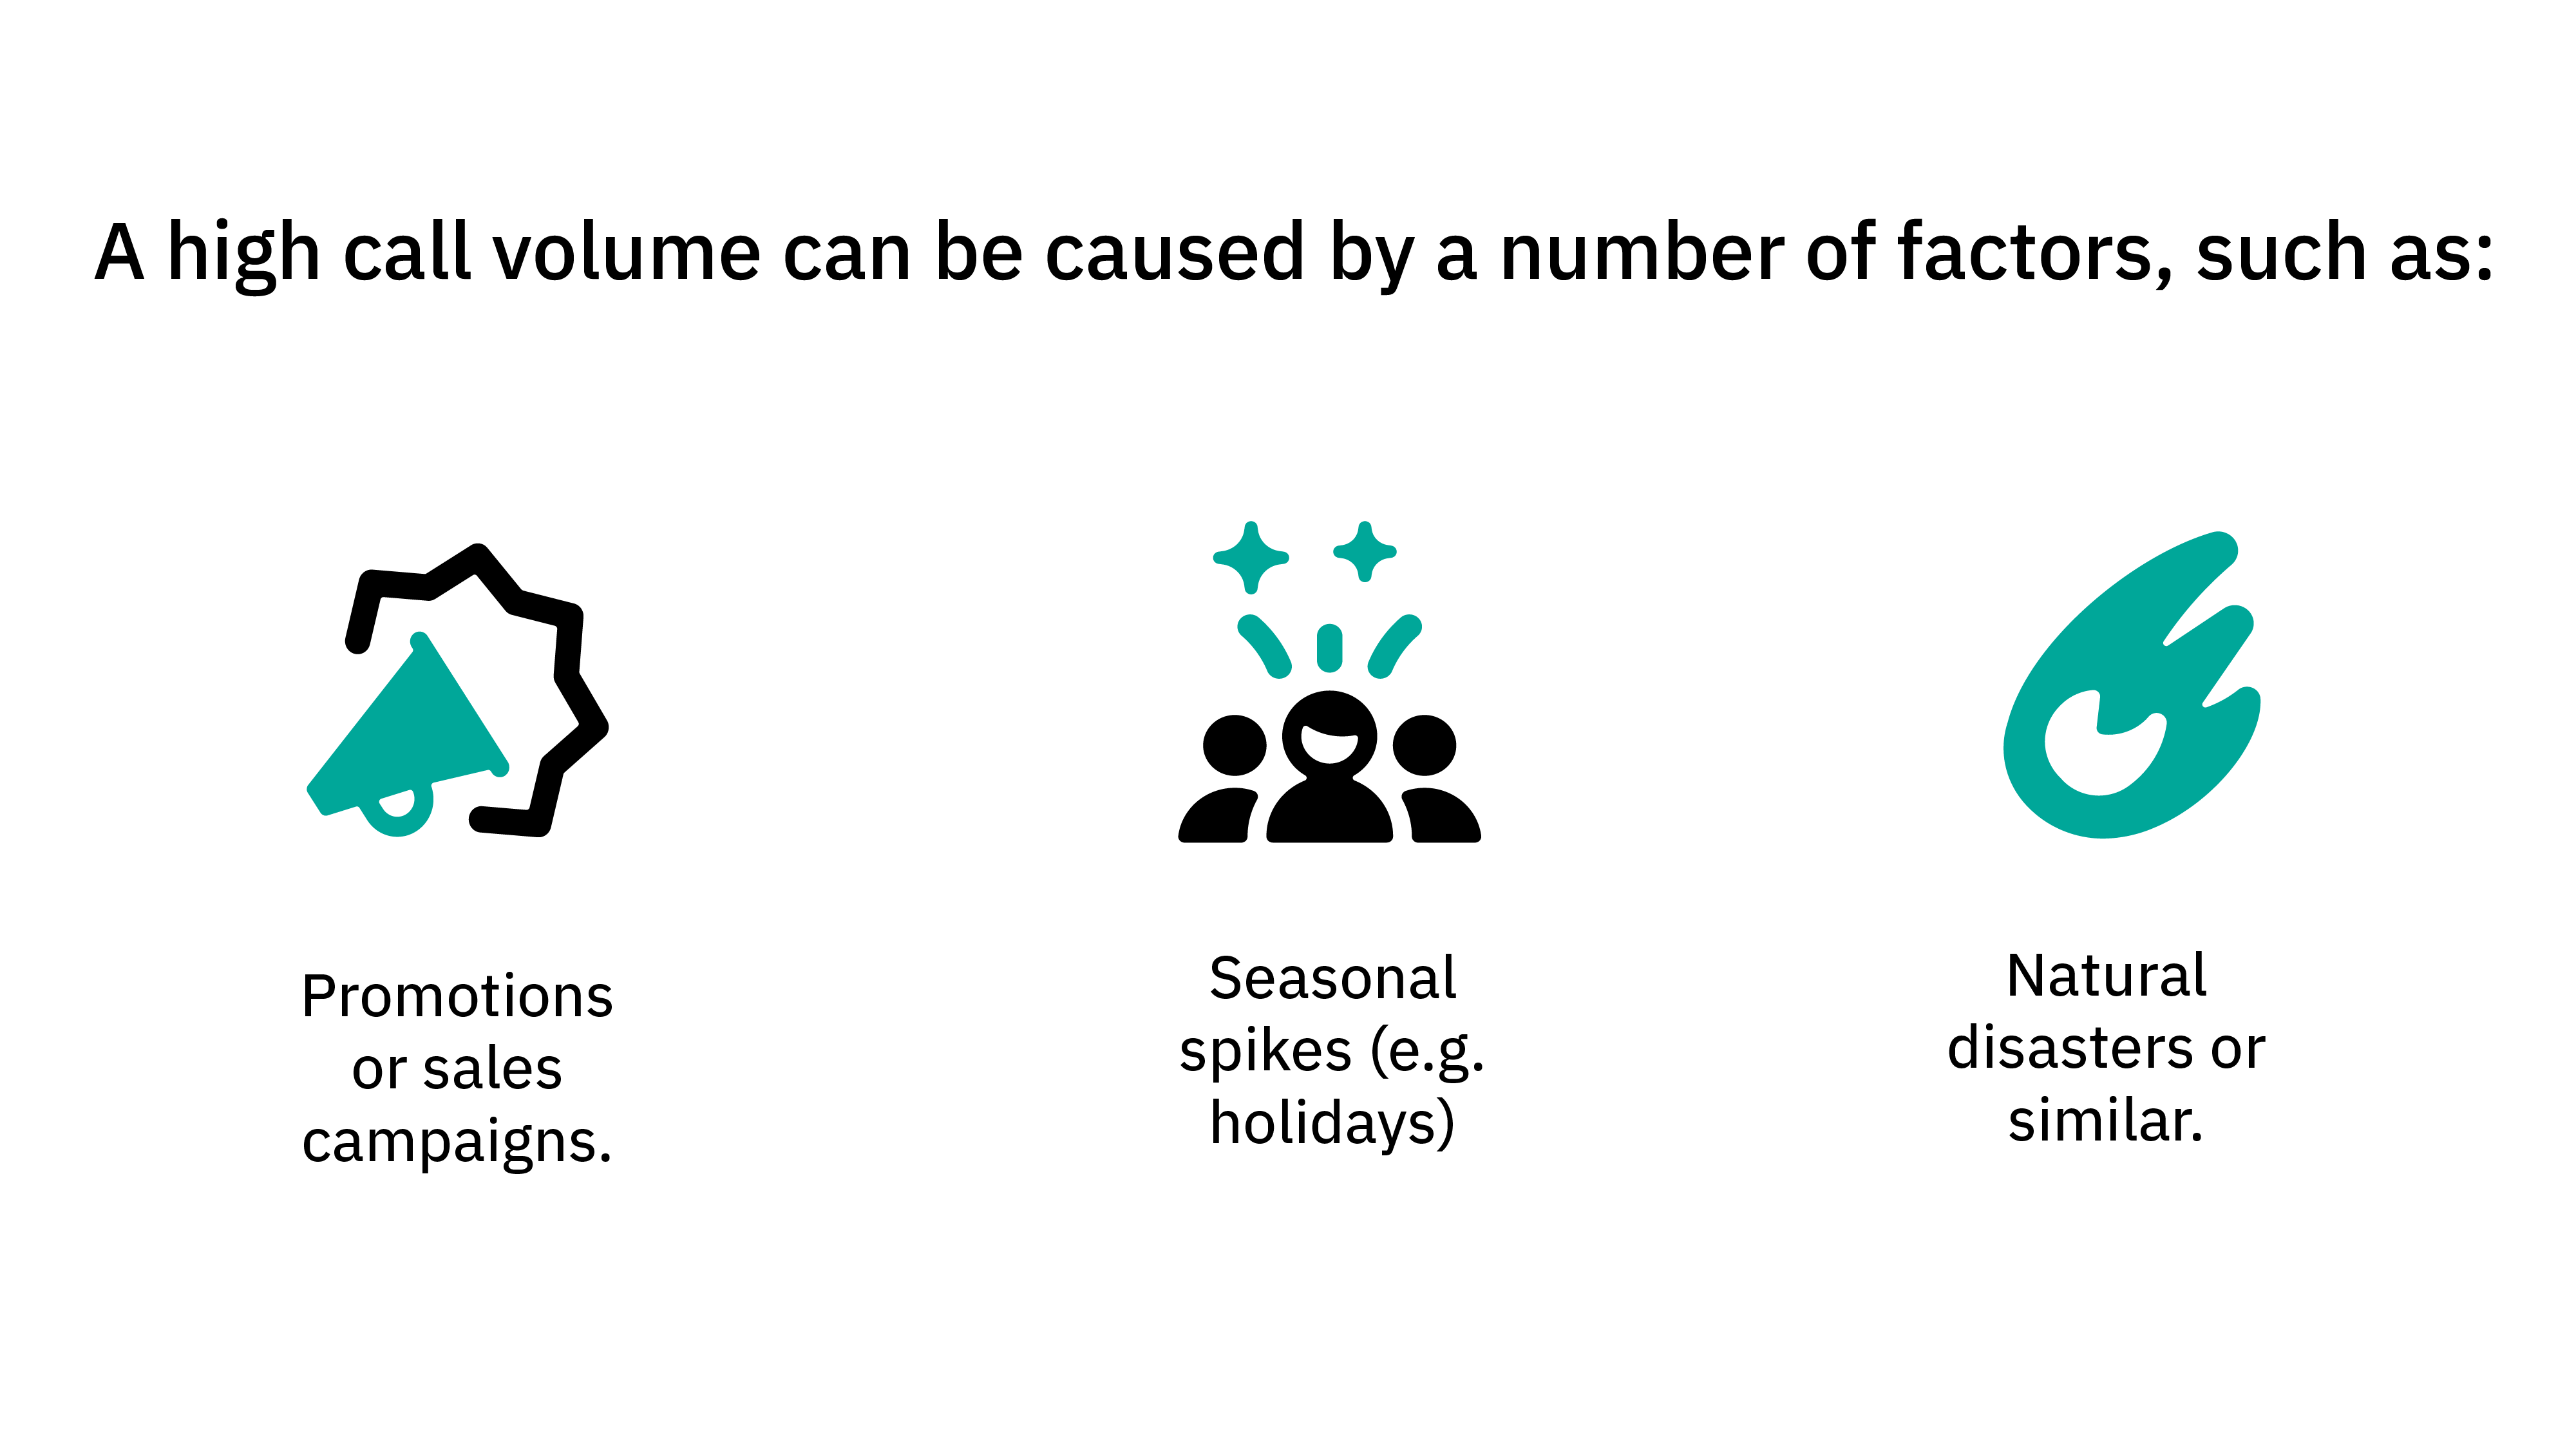 A high call volume can be caused by a number of factors, such as: